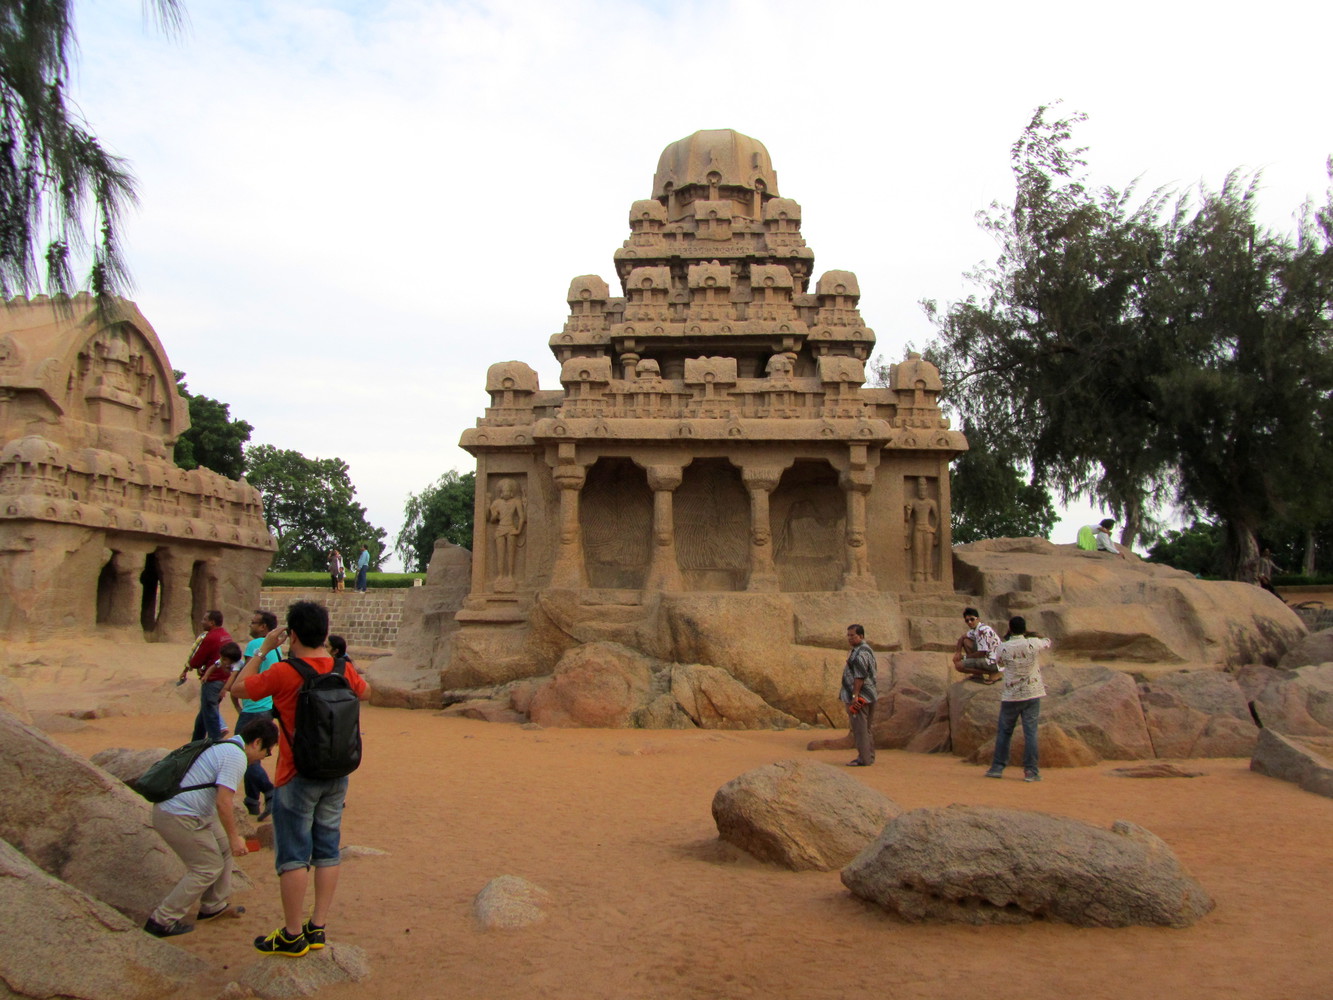 A monolithic granite monument known as Dharmaraja Ratha; it has a pyramidal structure which rises in three steps